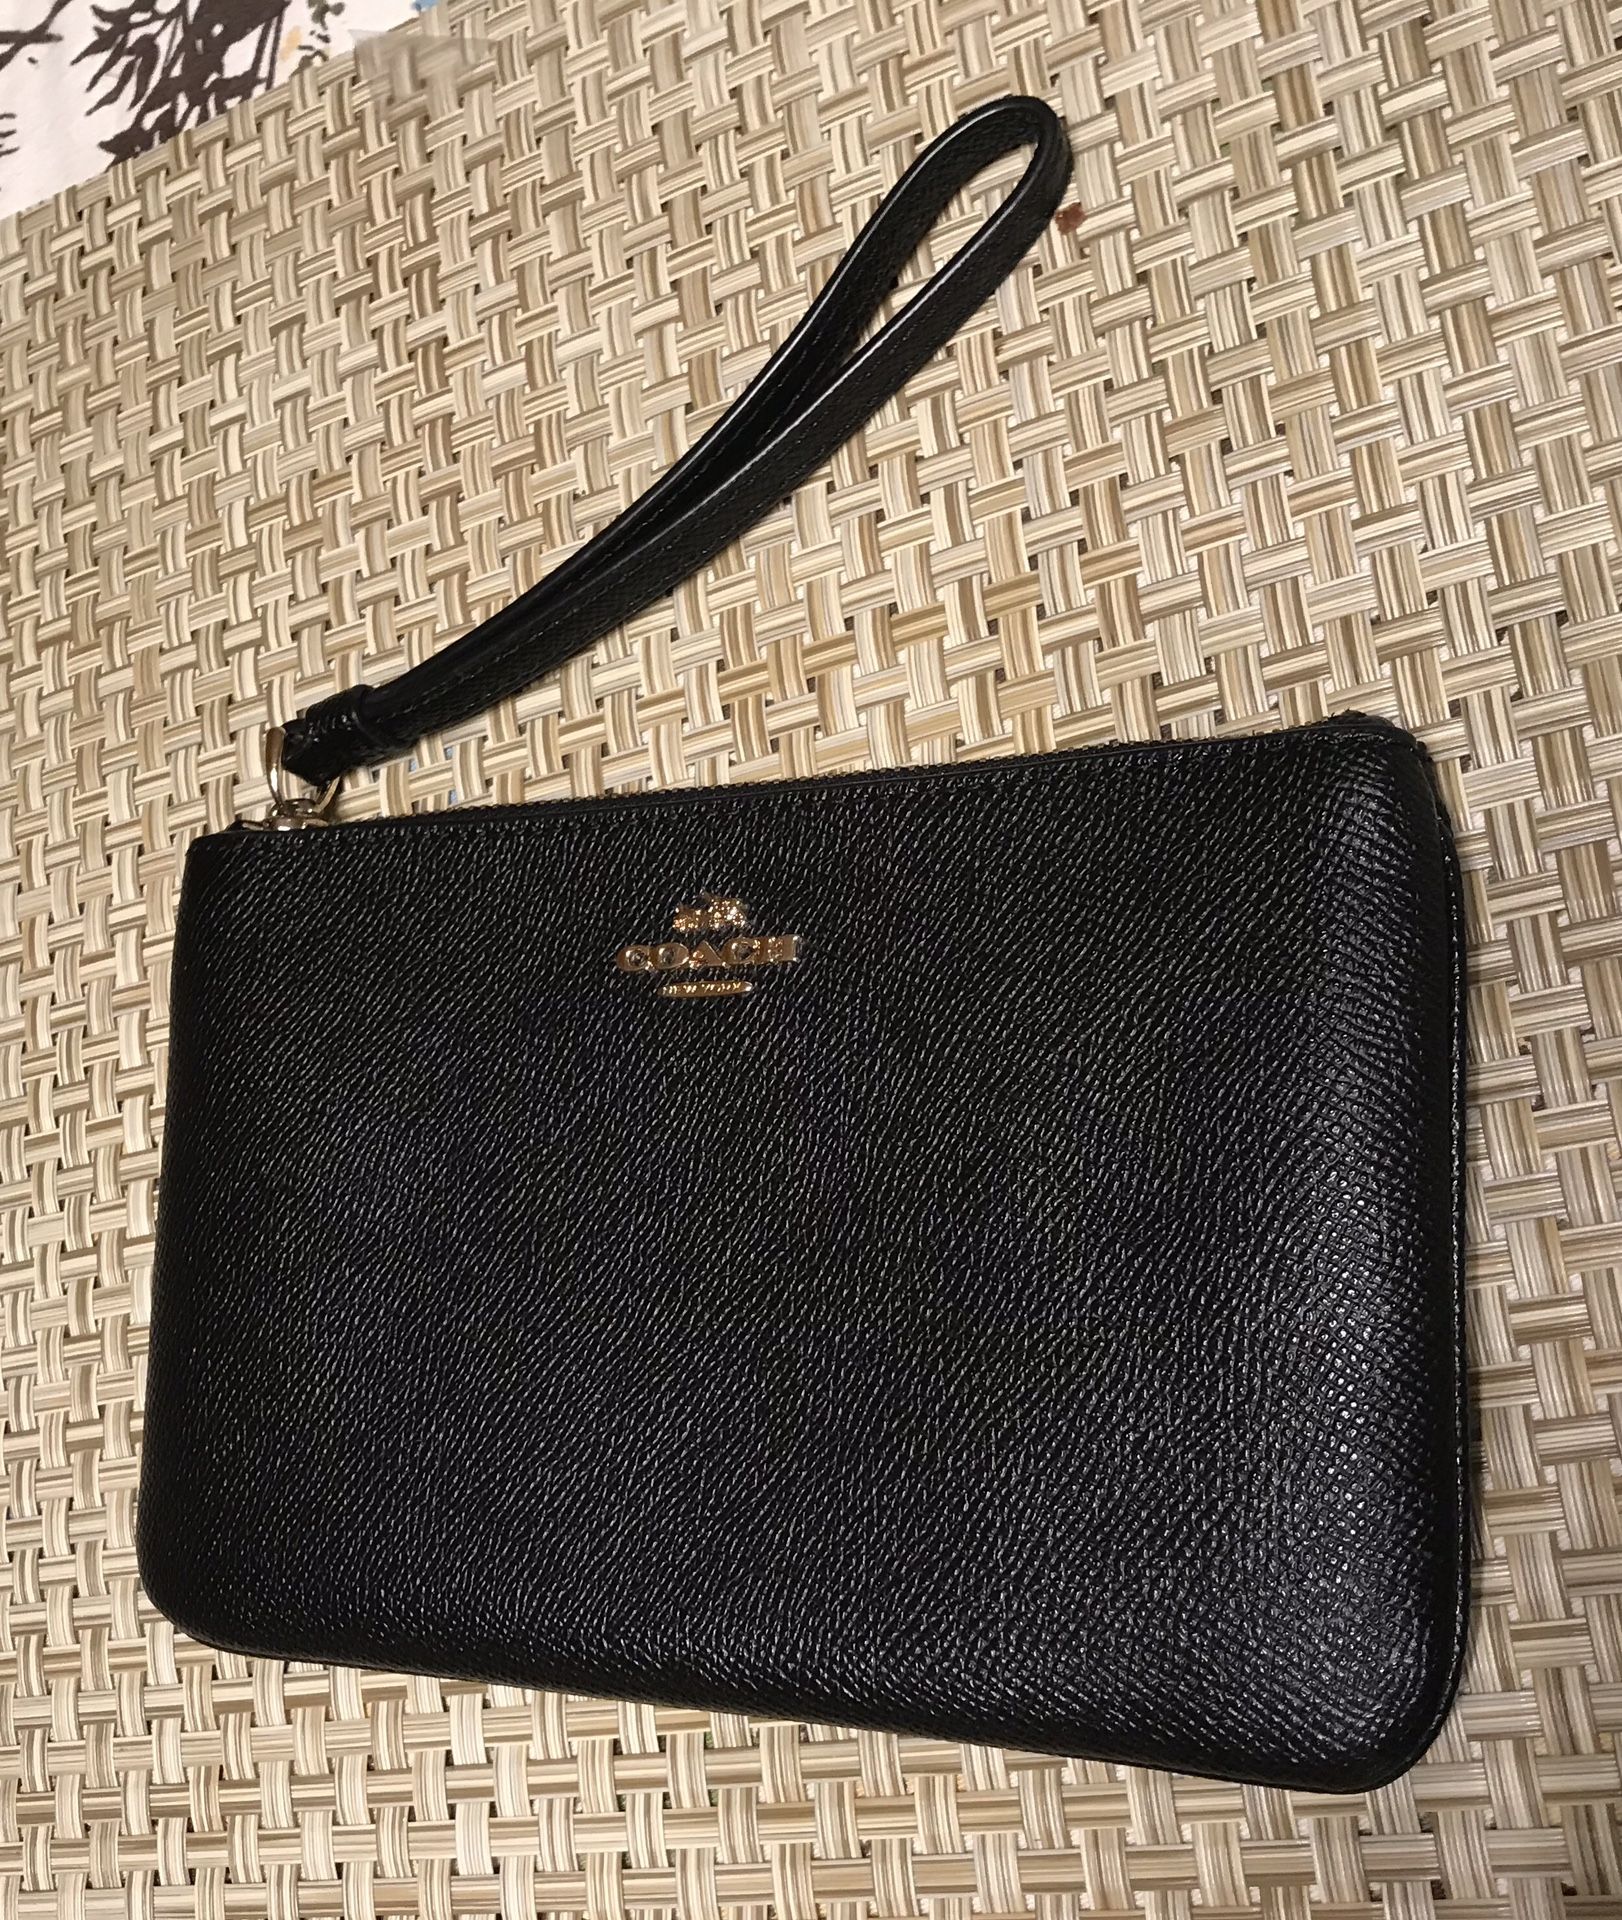 COACH large leather black Wristlet (check out my other items:)